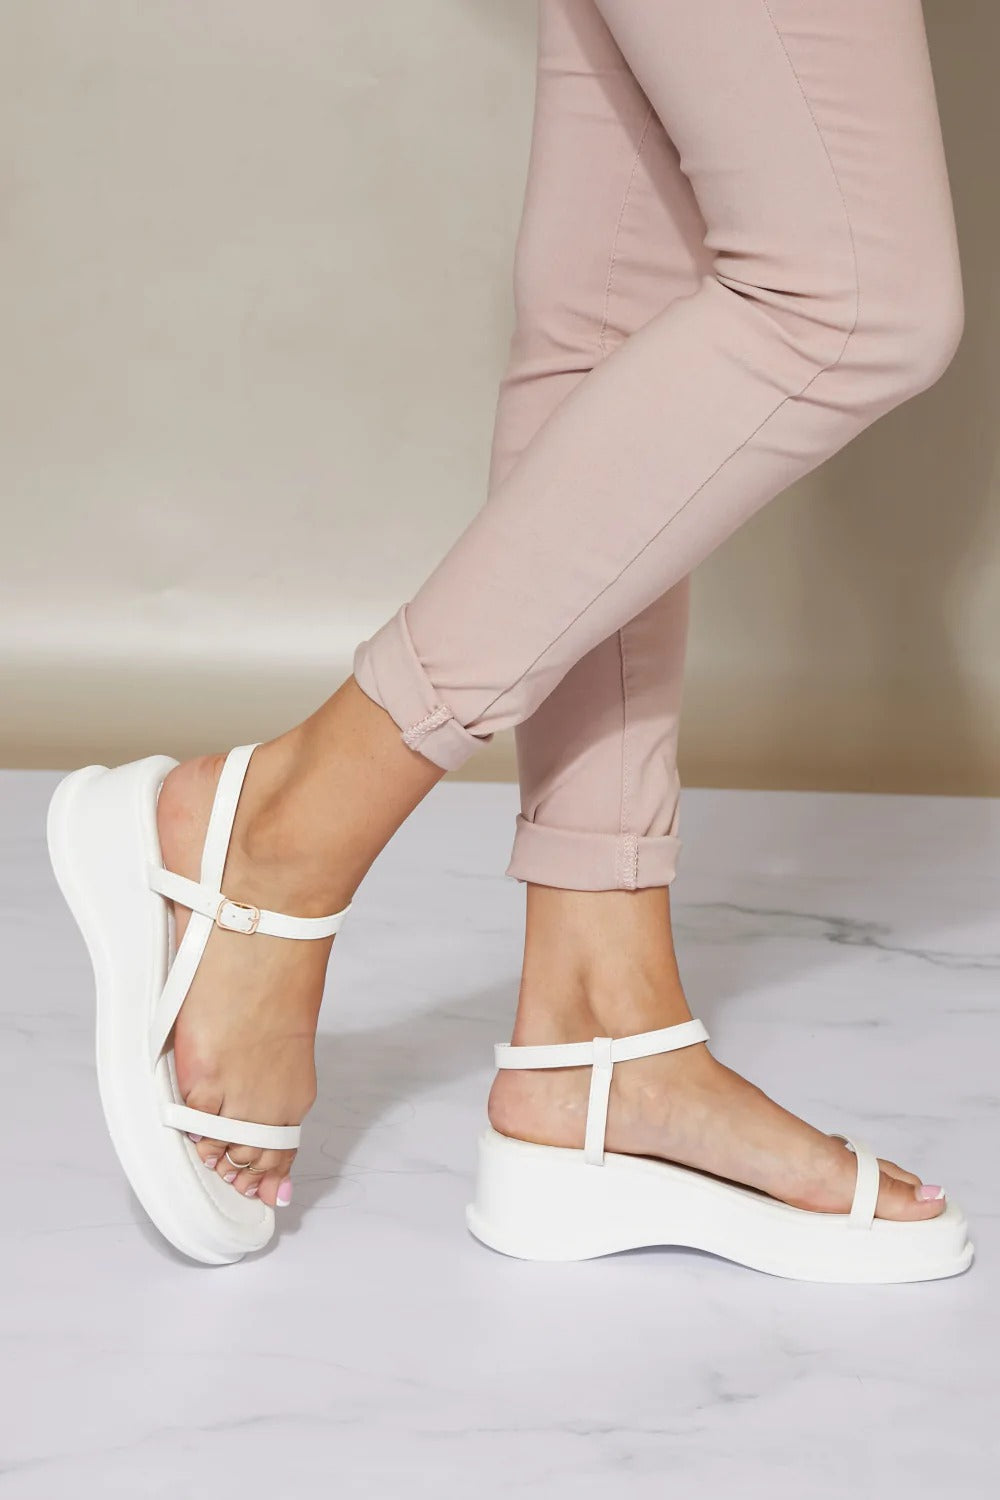 WEEBOO TIME IS NOW STRAPPY PLATFORM SANDALS